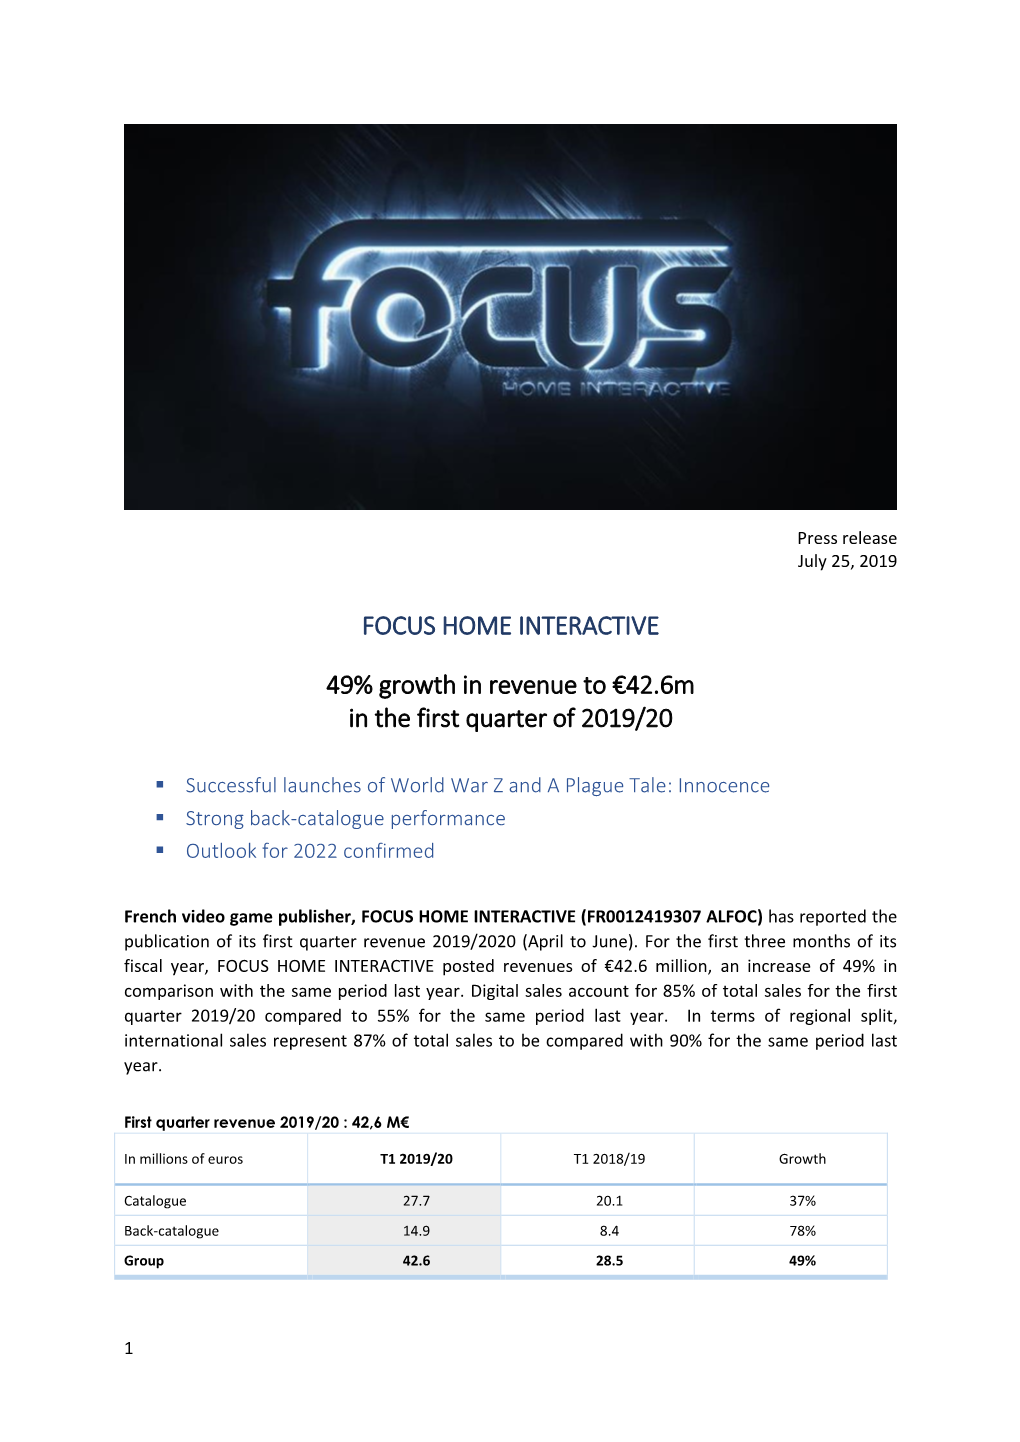 FOCUS HOME INTERACTIVE 49% Growth in Revenue to €42.6M in The